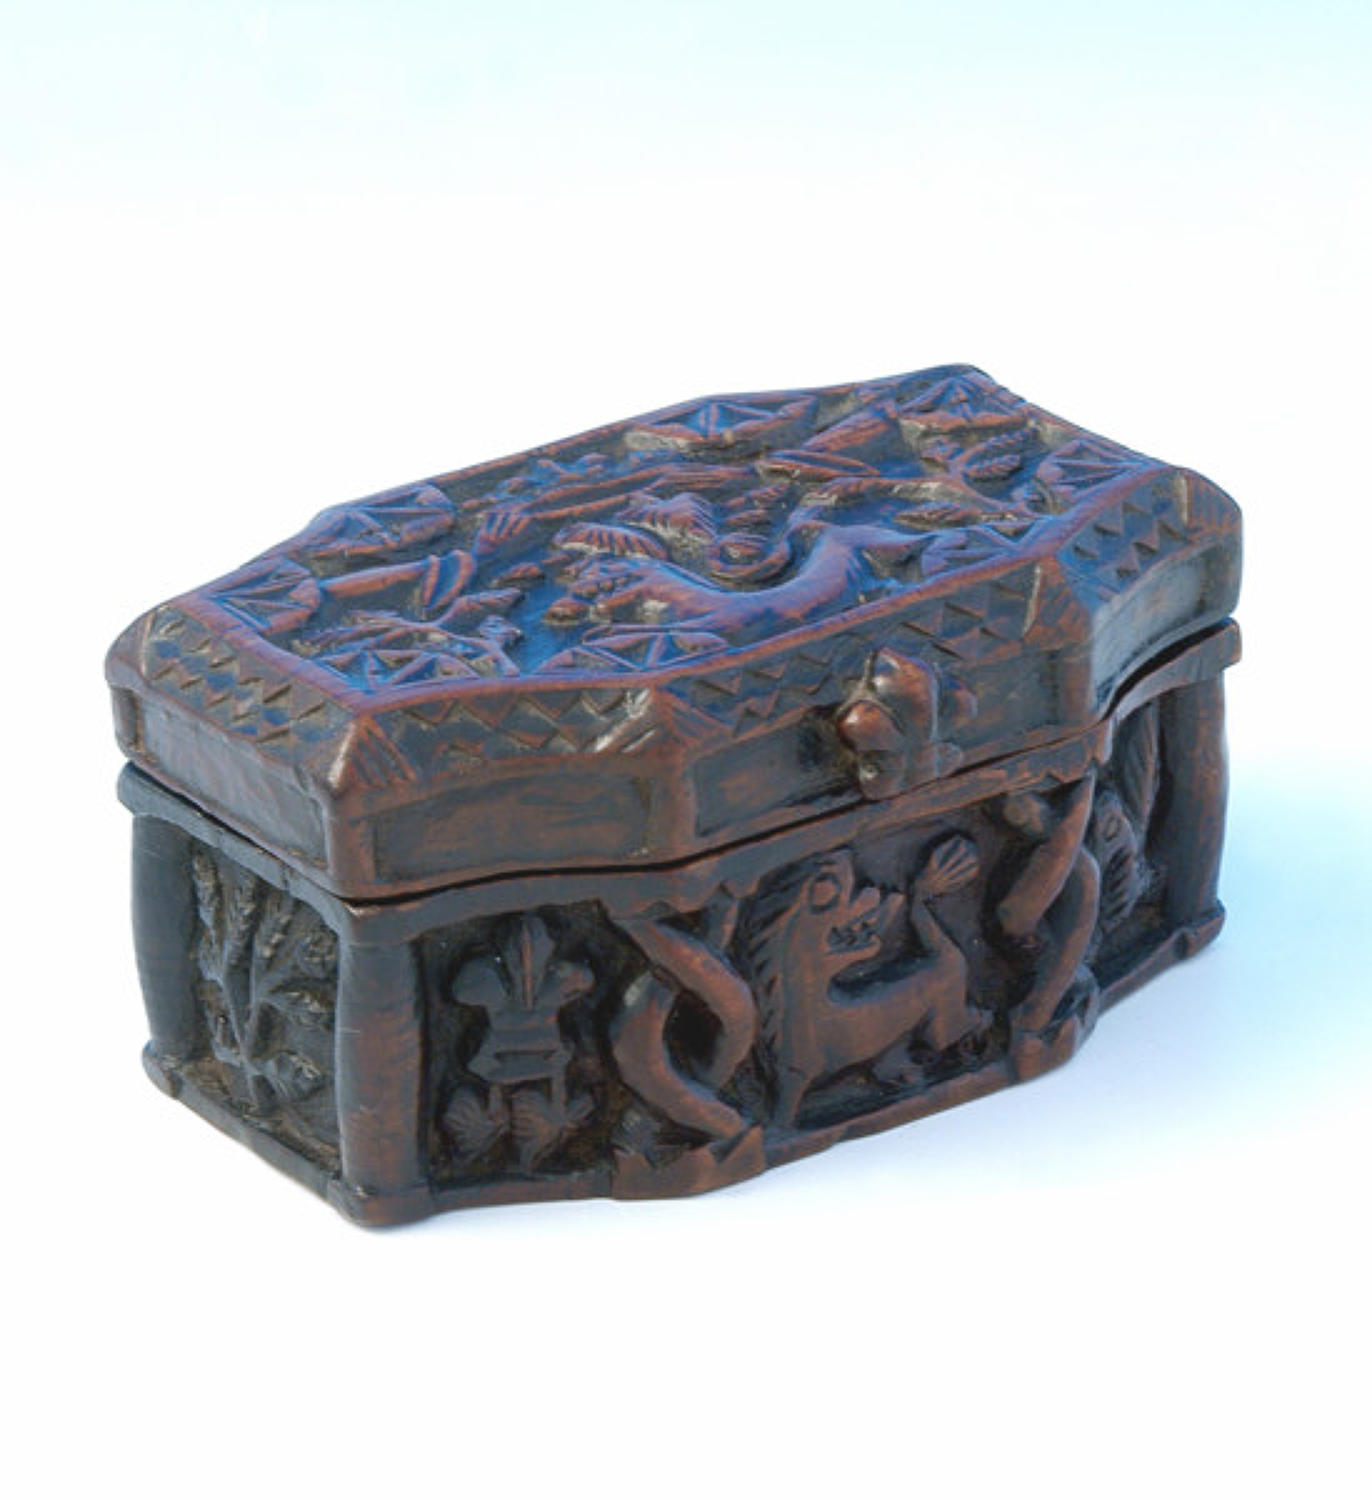 Late 18thc Fruitwood Snuff Box finely carved. Scottish C1780 - C1800